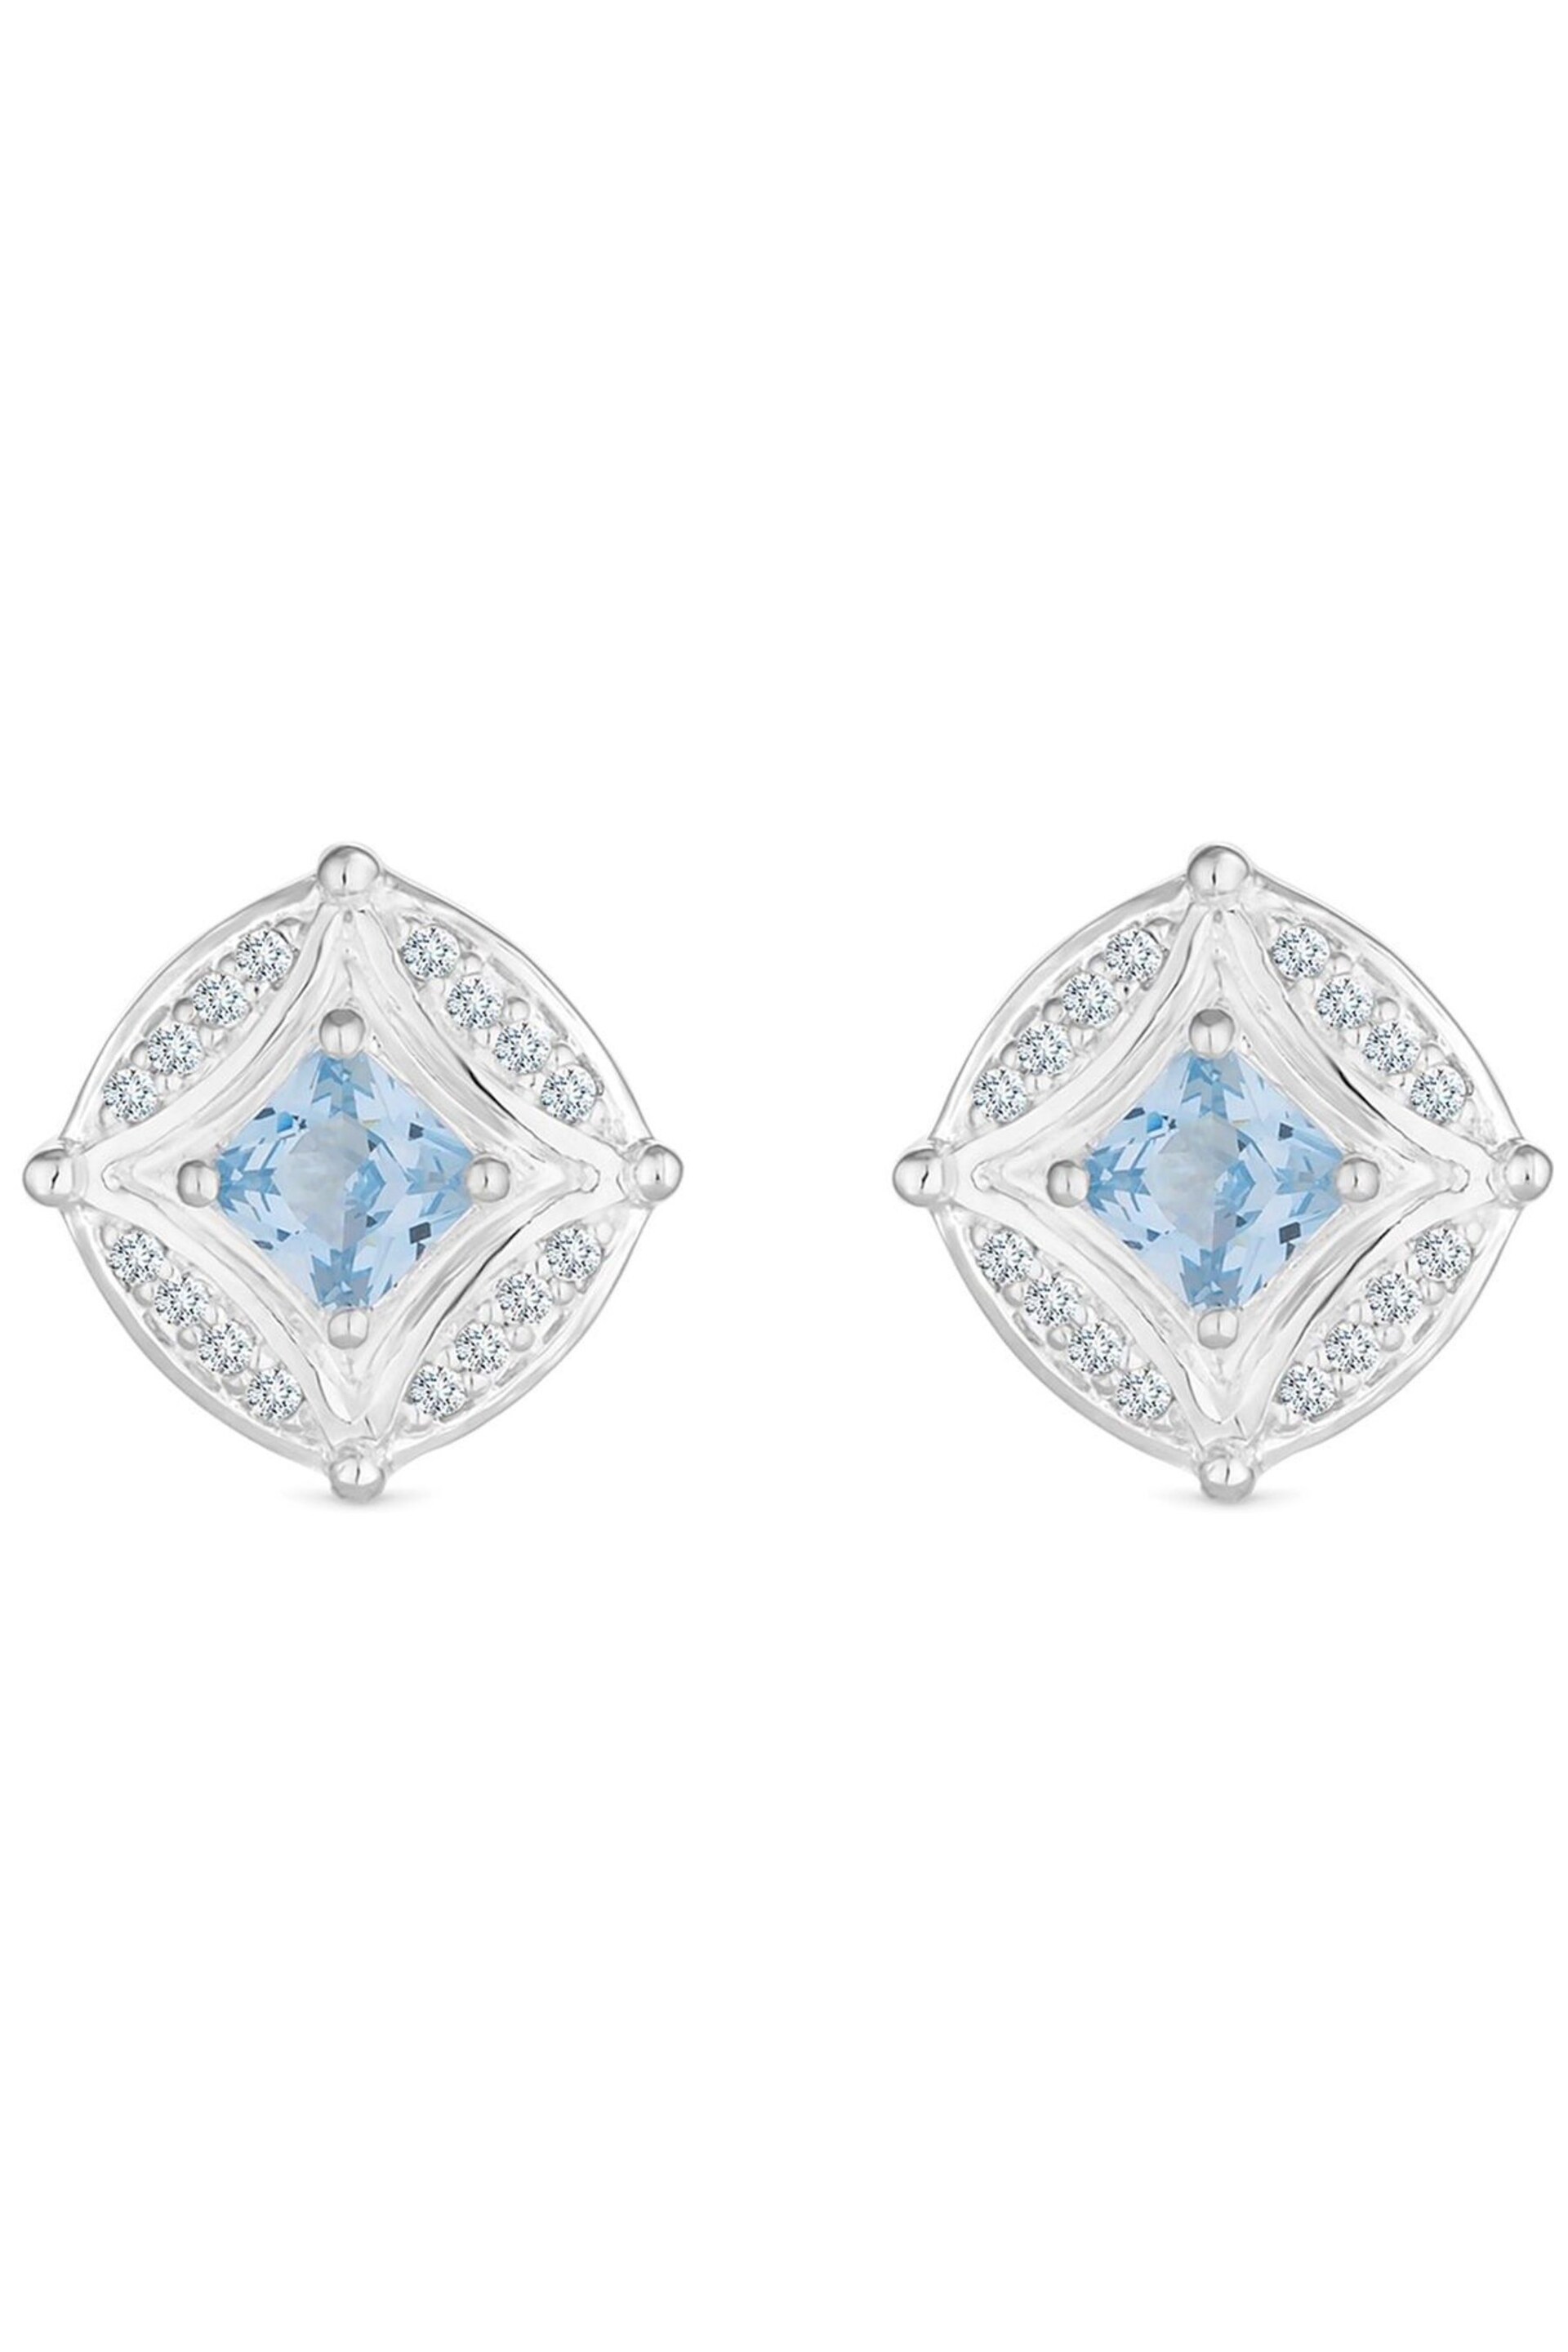 Simply Silver Silver Tone Spinel And Cubic Zirconia Earrings - Image 1 of 3